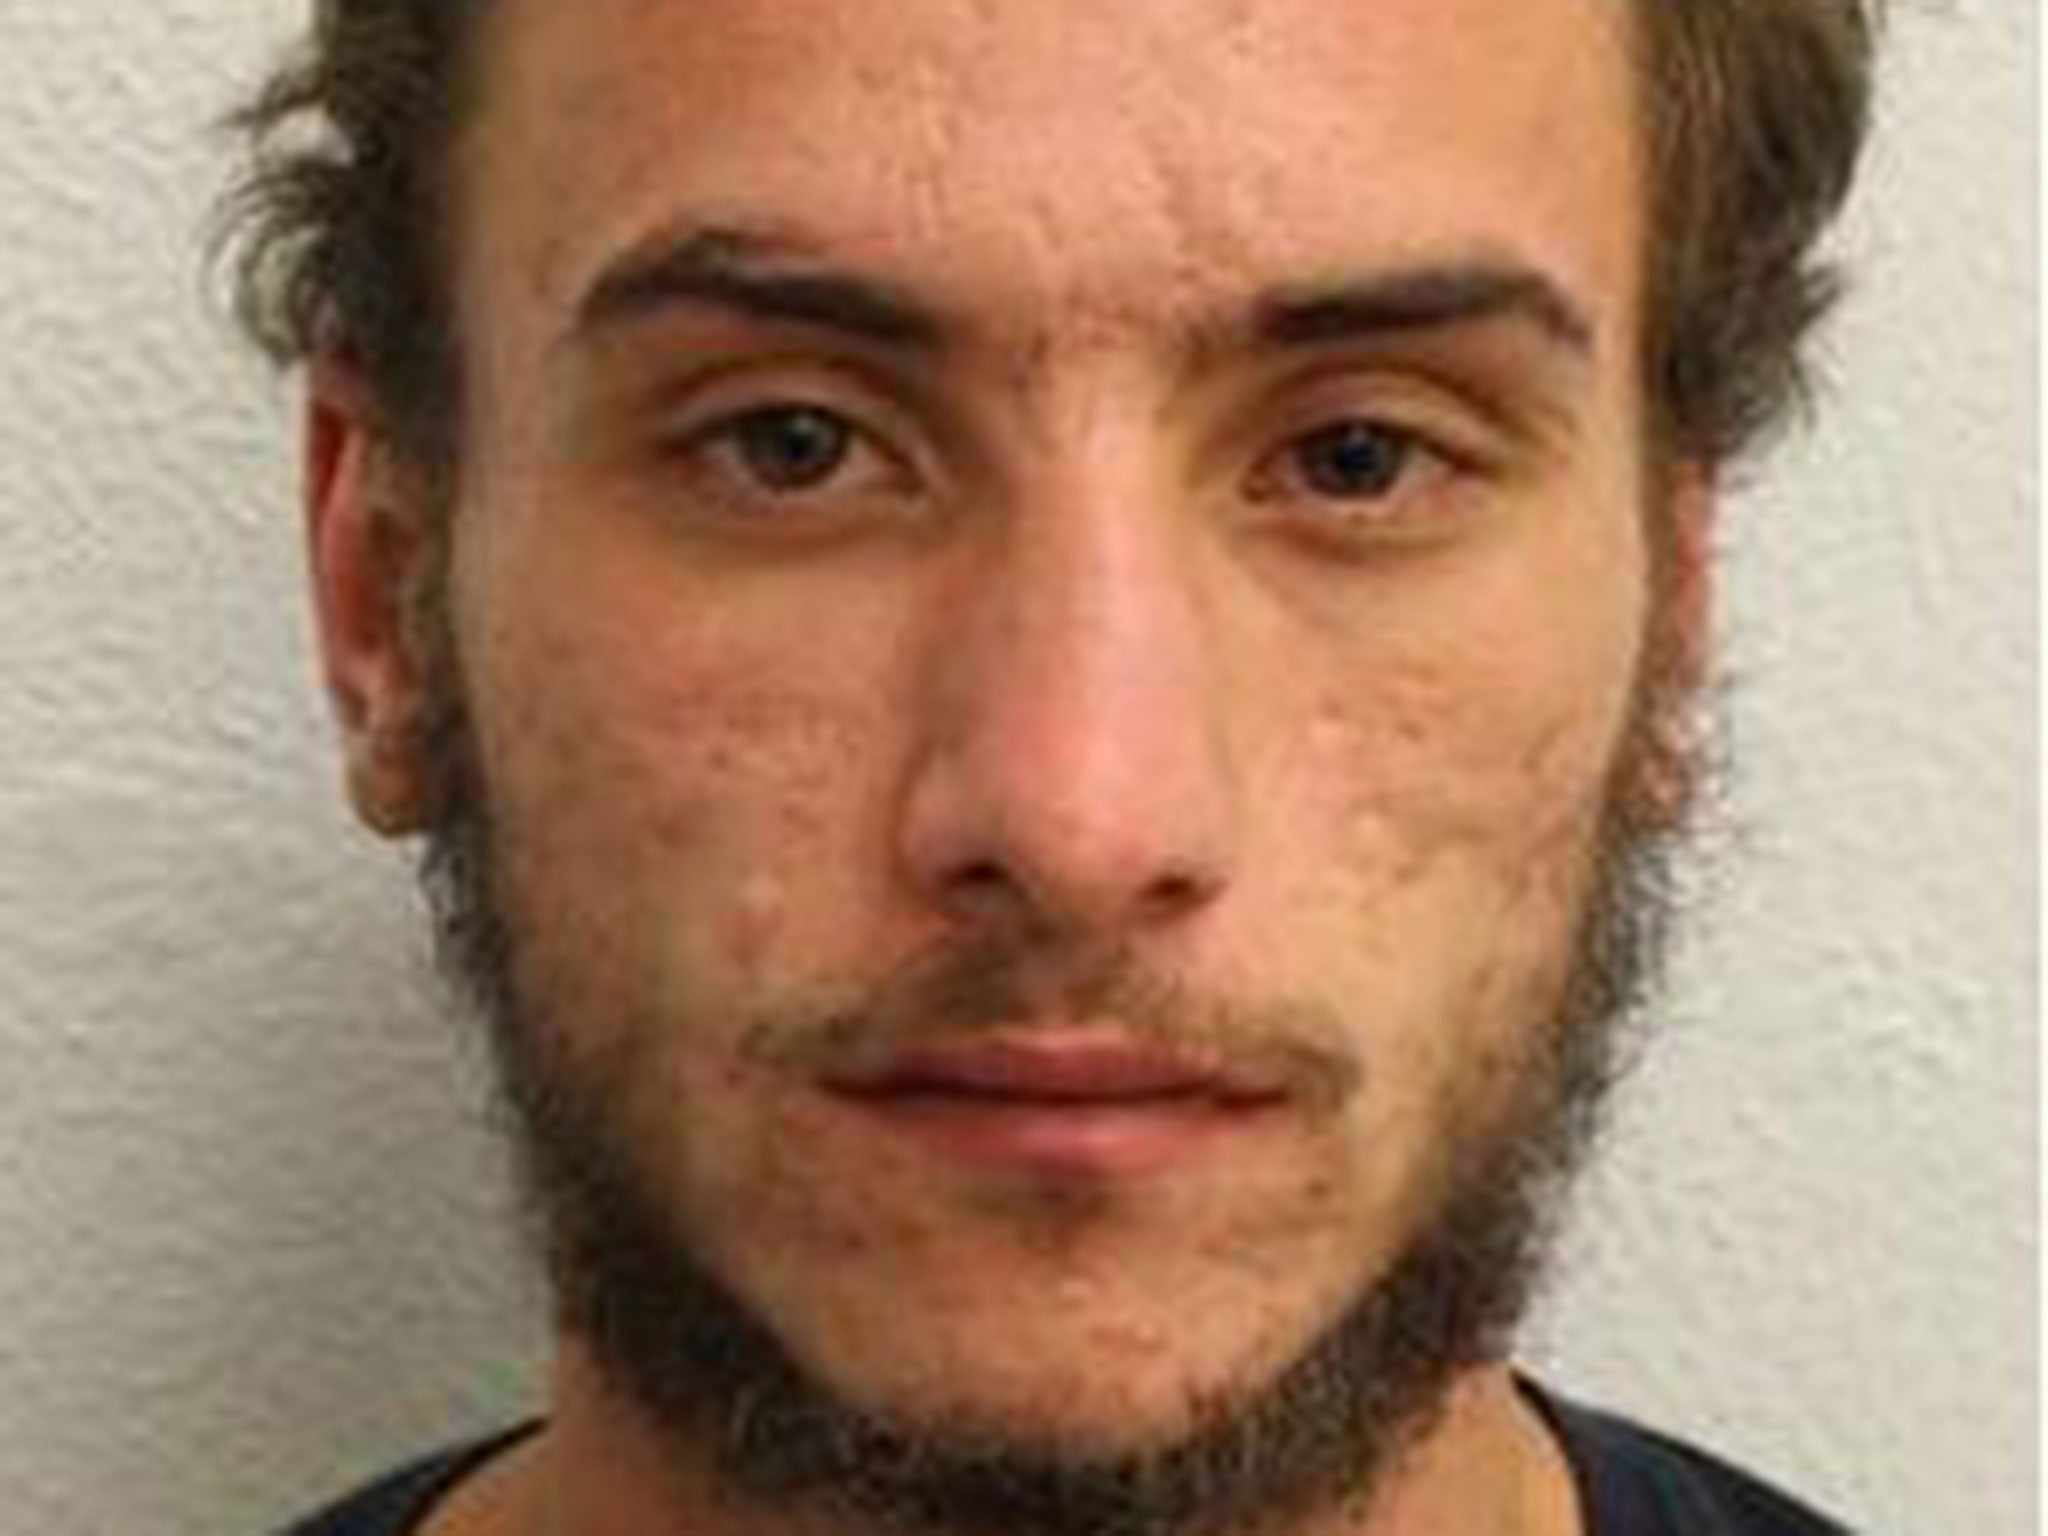 Homeless man jailed for carrying bleach as &apos;offensive weapon&apos; in London